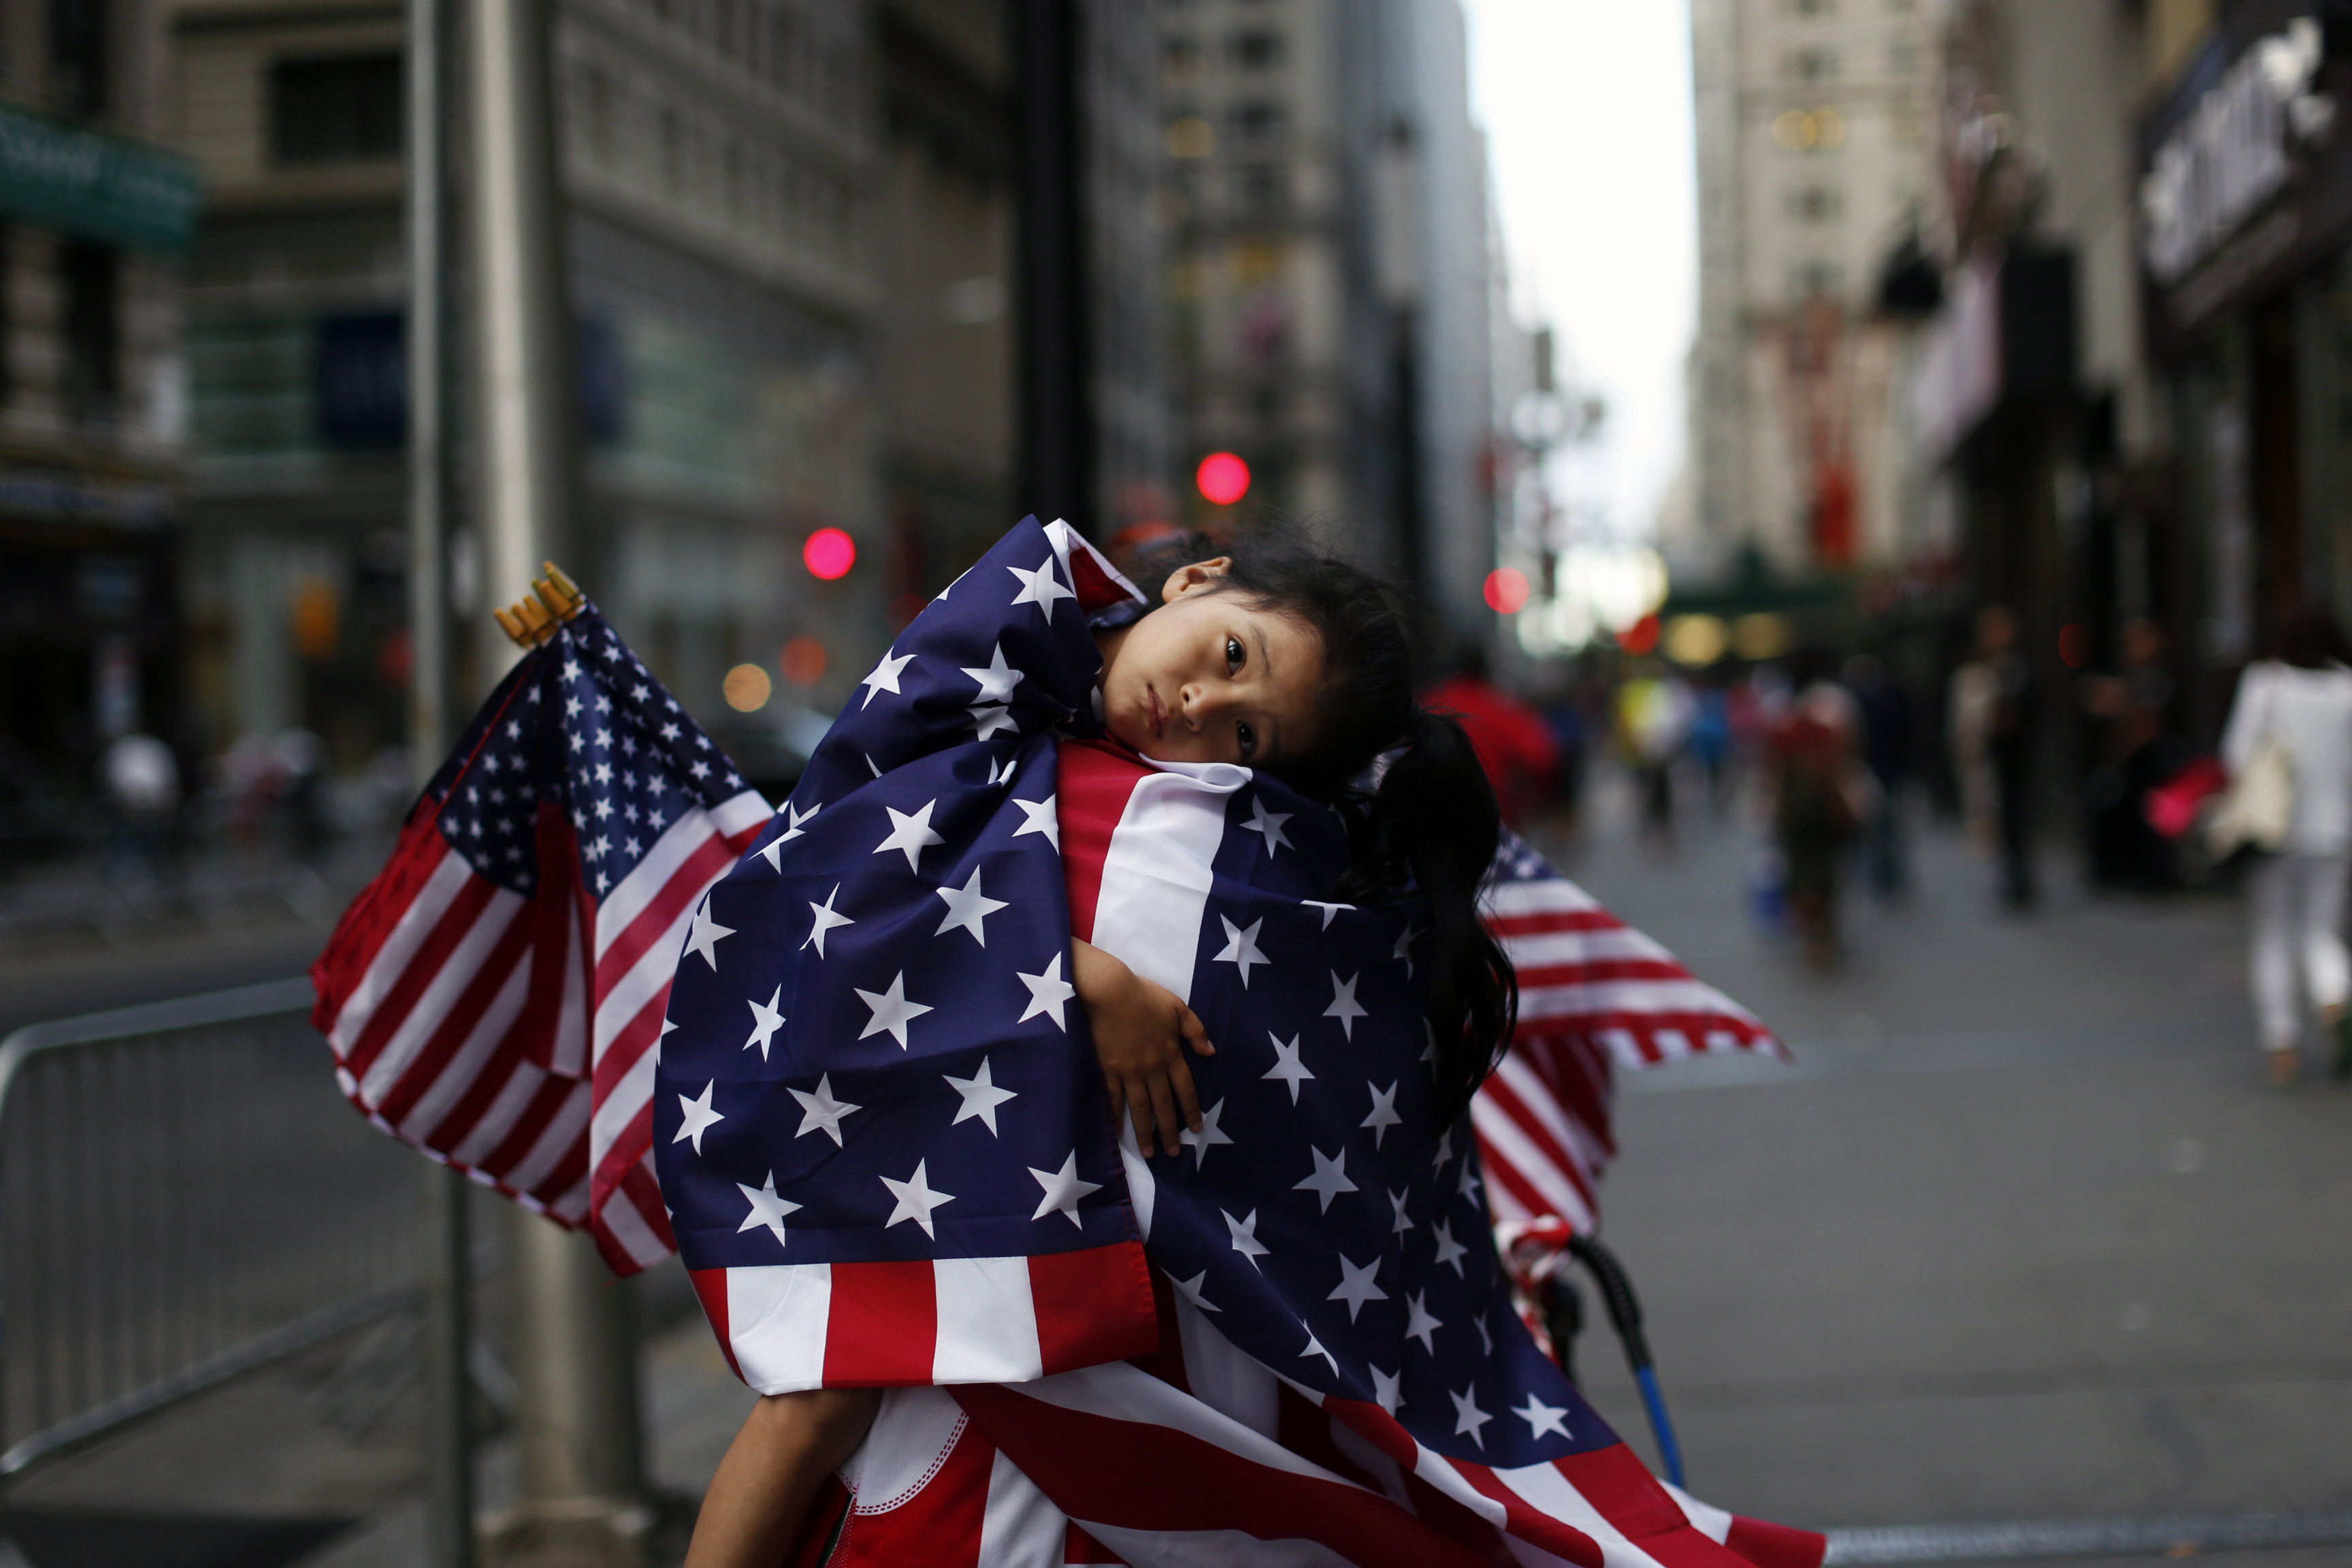 A child draped in United States flags rests on a revelers' shoulder ahead of a ticker-tape parade celebrating the World Cup victory for the U.S. women's soccer team in New York on July 10, 2015.